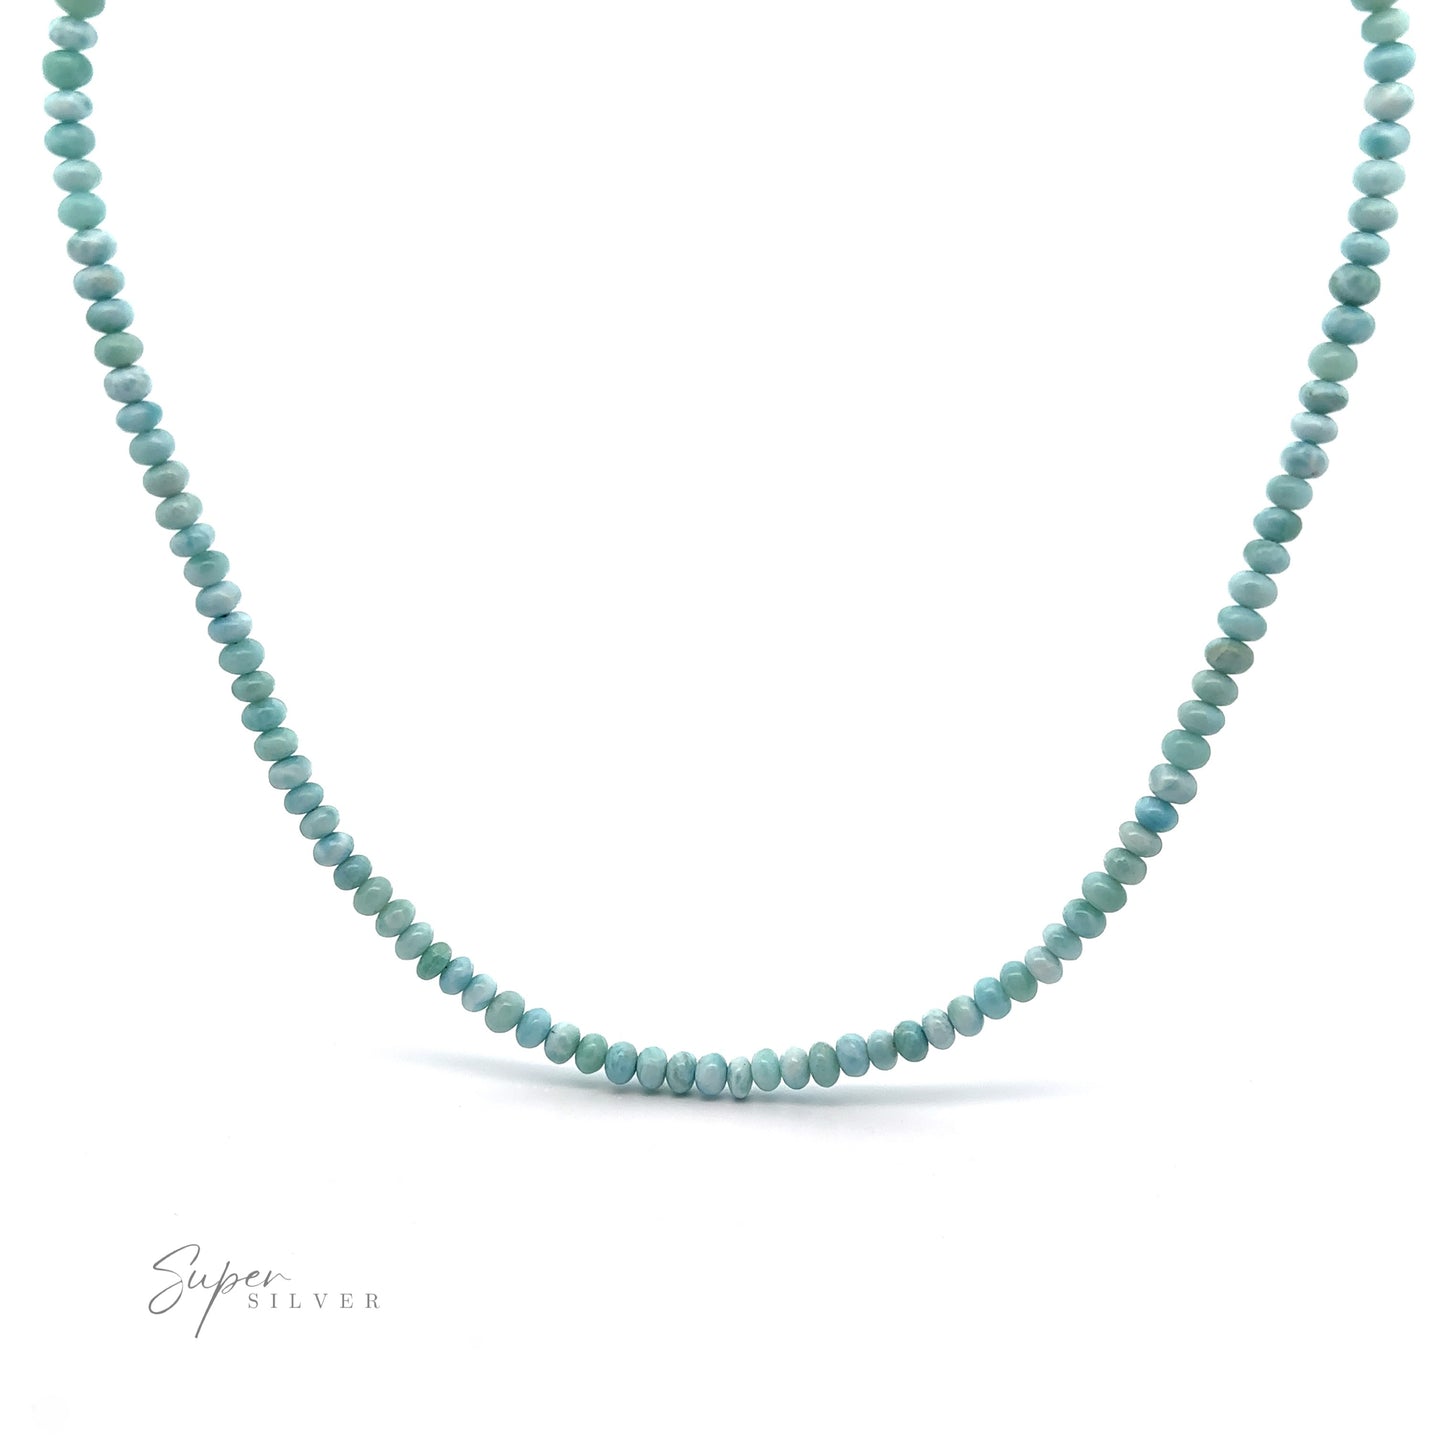 
                  
                    A Larimar Beaded Necklace displayed in a single loop with evenly spaced round beads. The background is plain white, and the "Super Silver" logo is present in the bottom left corner. This Caribbean necklace, often called the Stone of Atlantis, exudes elegance and mystique.
                  
                